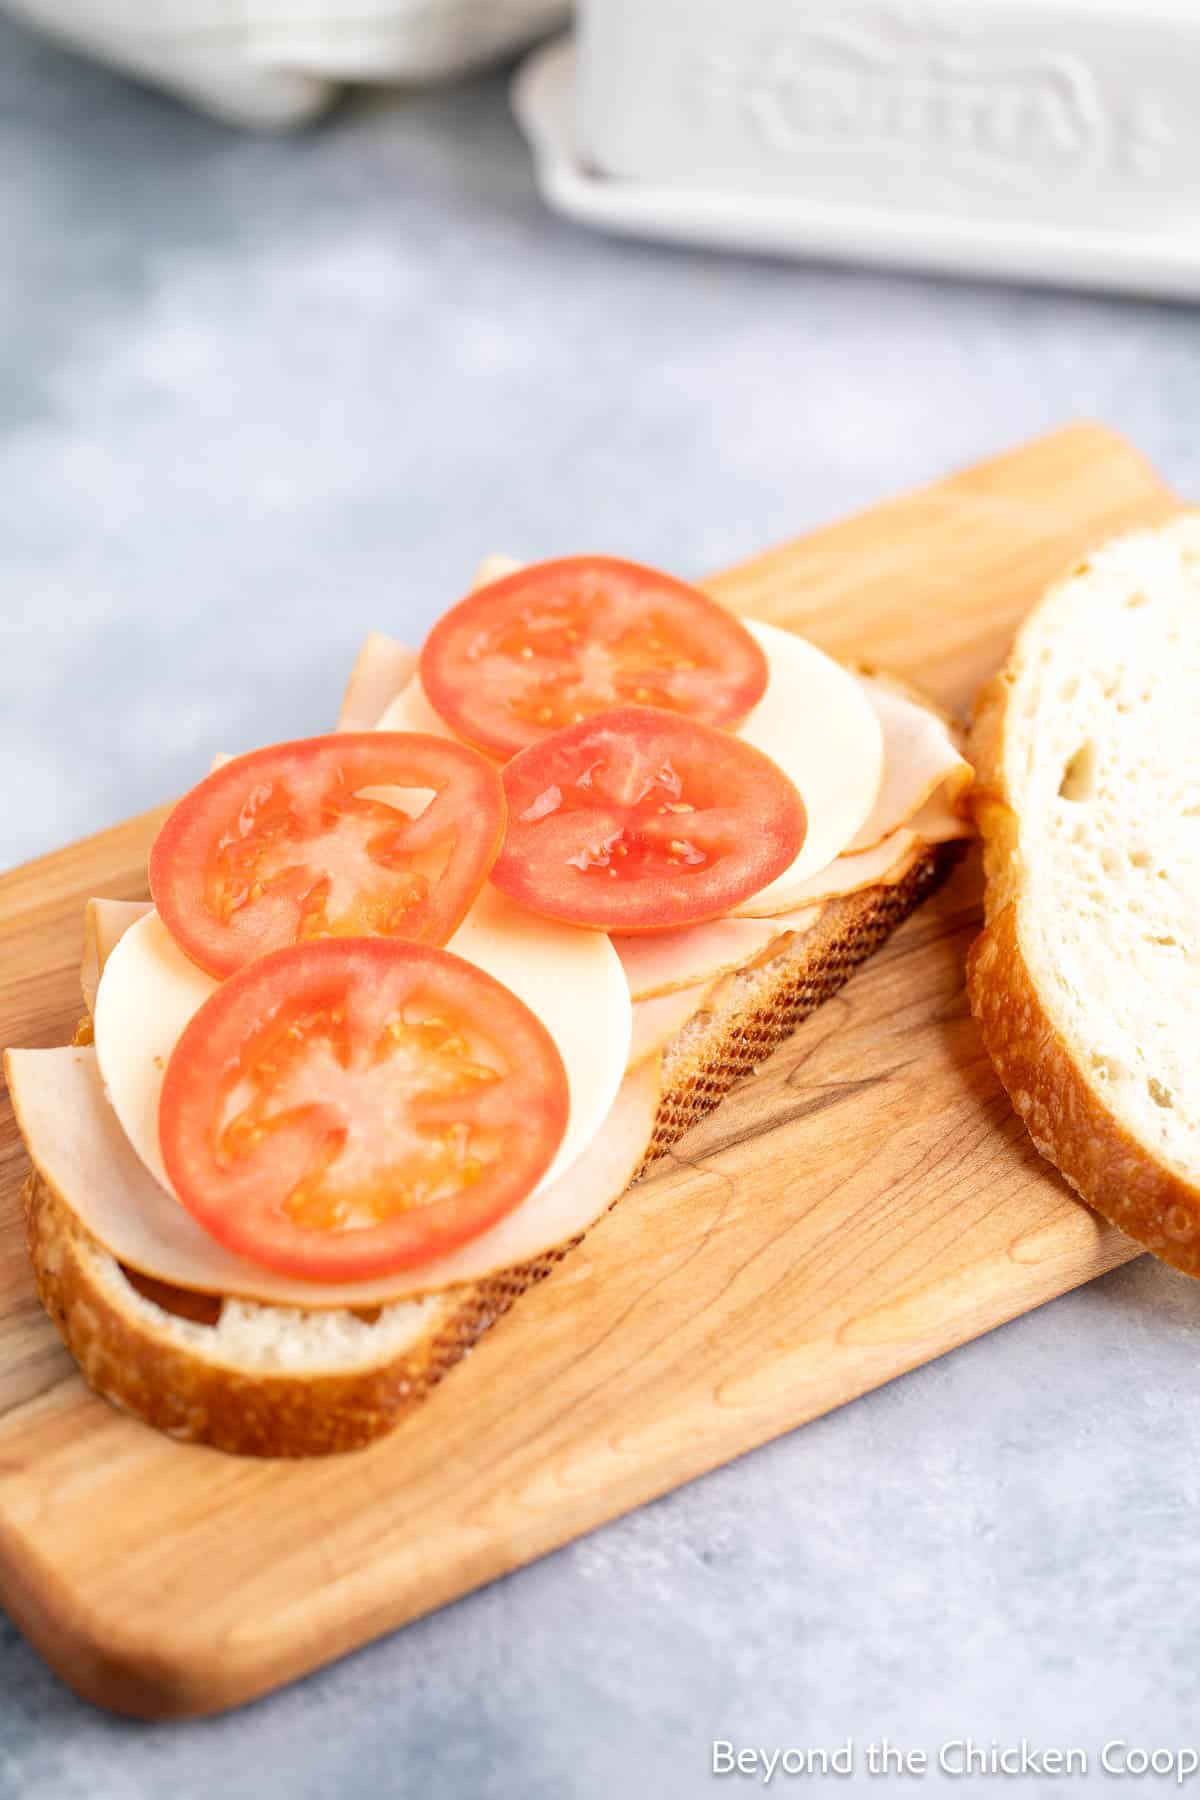 A slice of bread topped with turkey, cheese and sliced tomatoes.